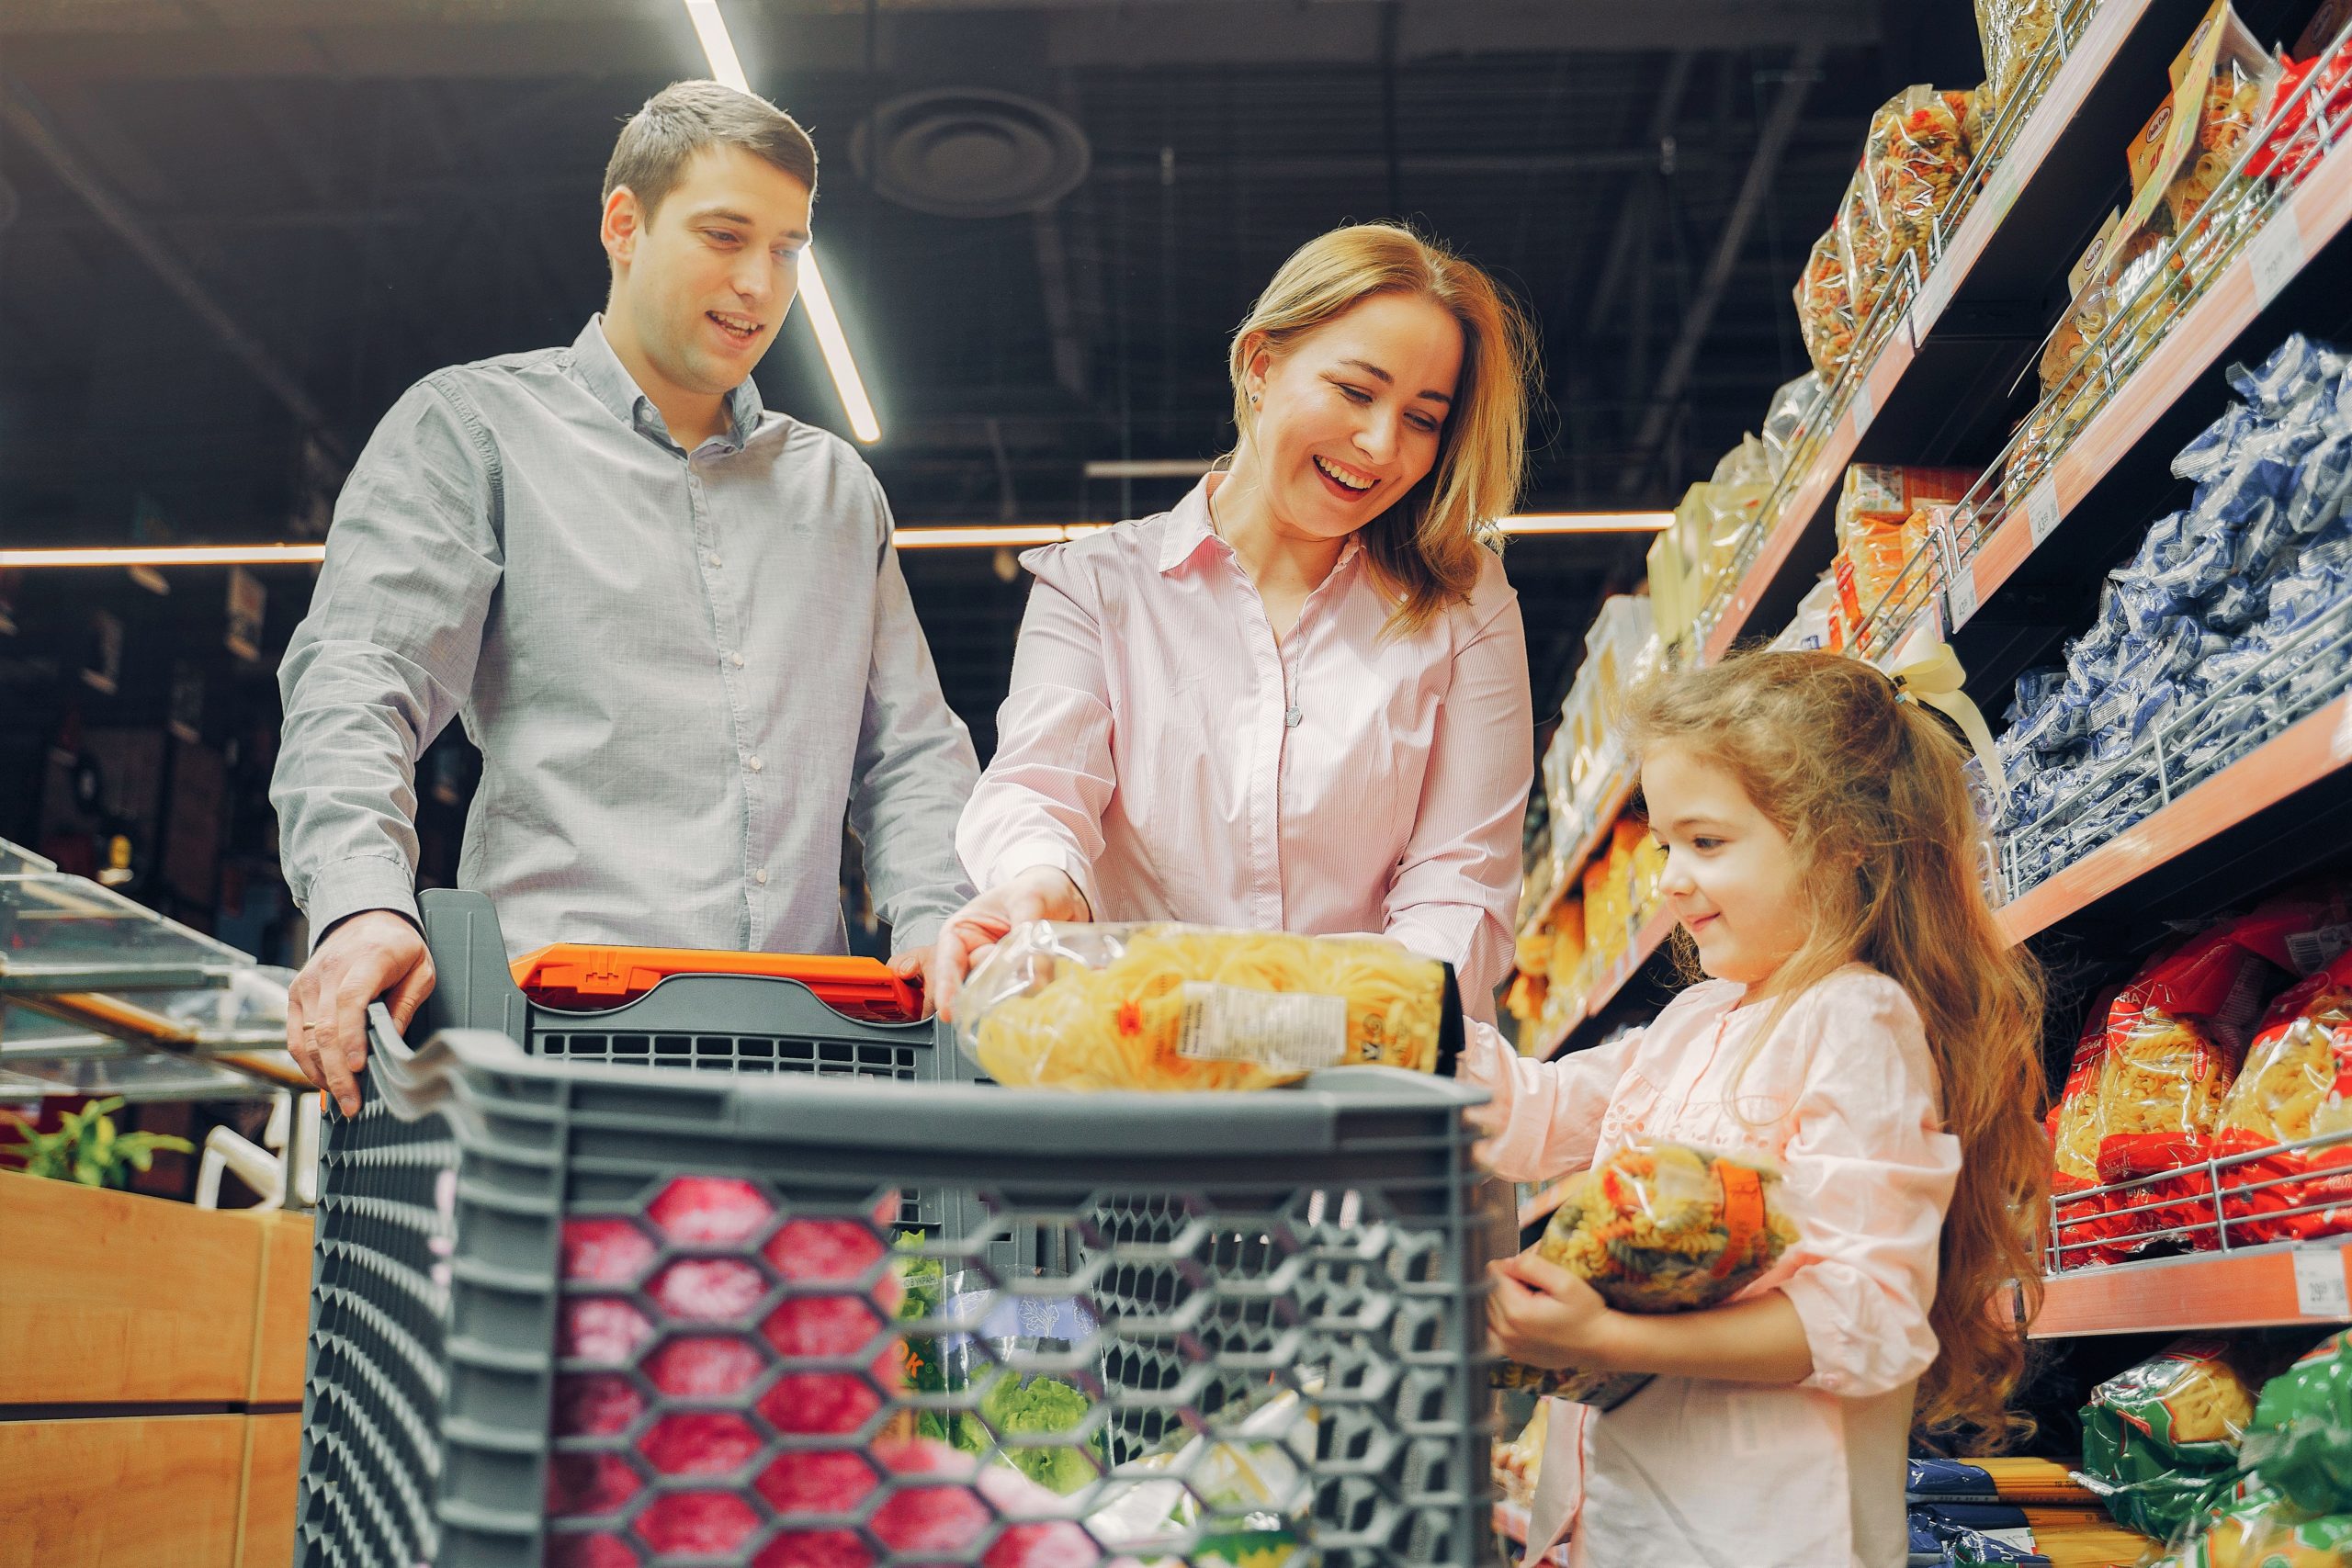 A mum dad and child enjoy a trip to the supermarket where the daughter is putting pasta in the trolley